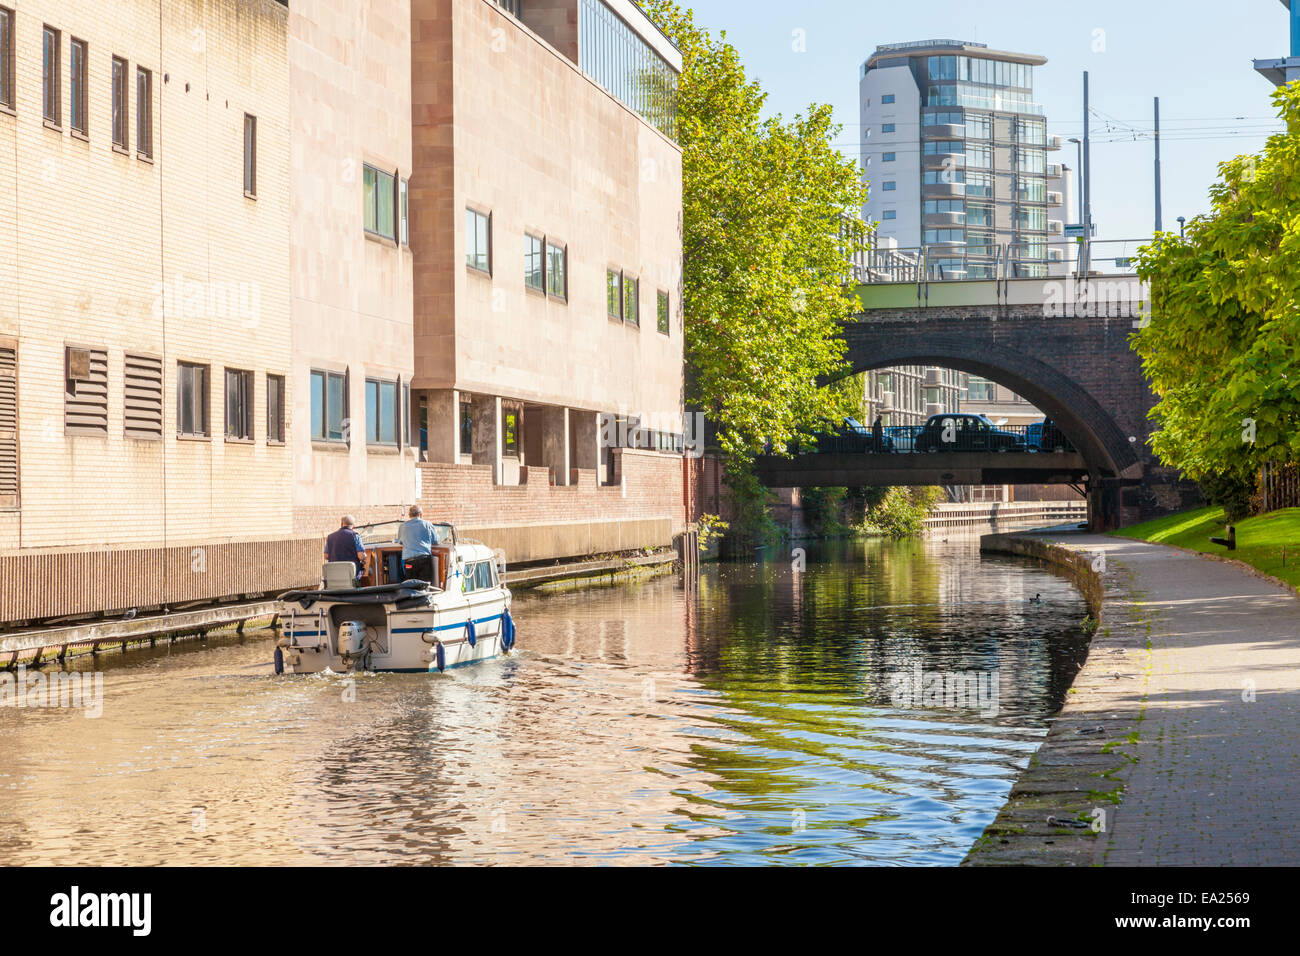 UK city canals. A boat on the Nottingham and Beeston Canal passing through Nottingham, England, UK Stock Photo